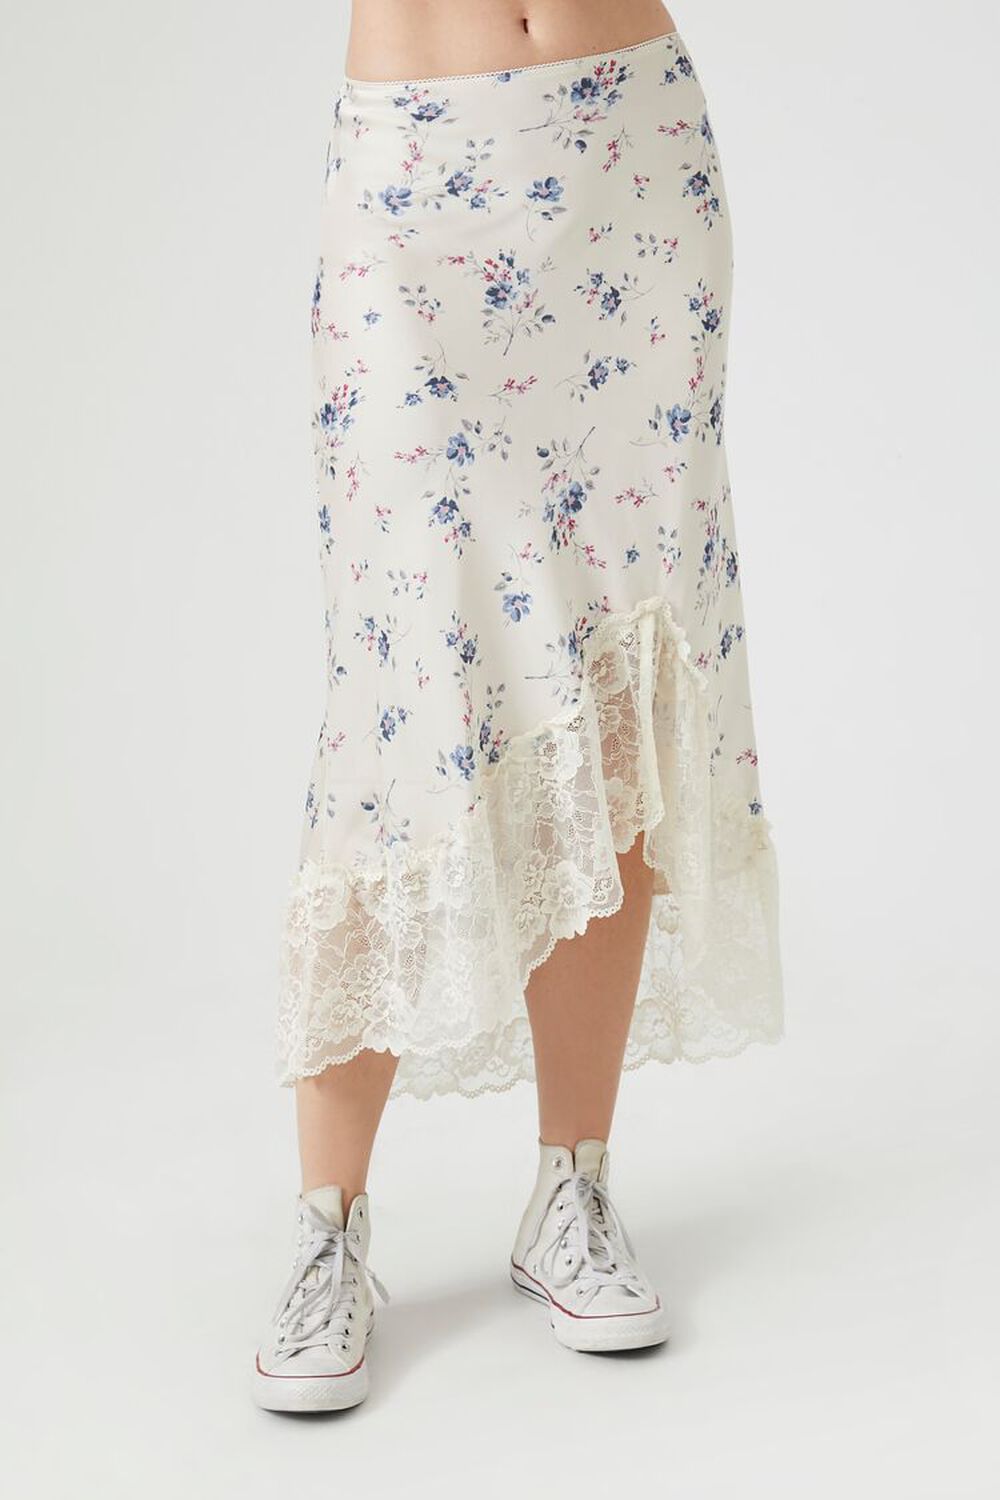 Summer Flowers Printed Cotton Midi Wrap Skirt in Ivory, Off-White